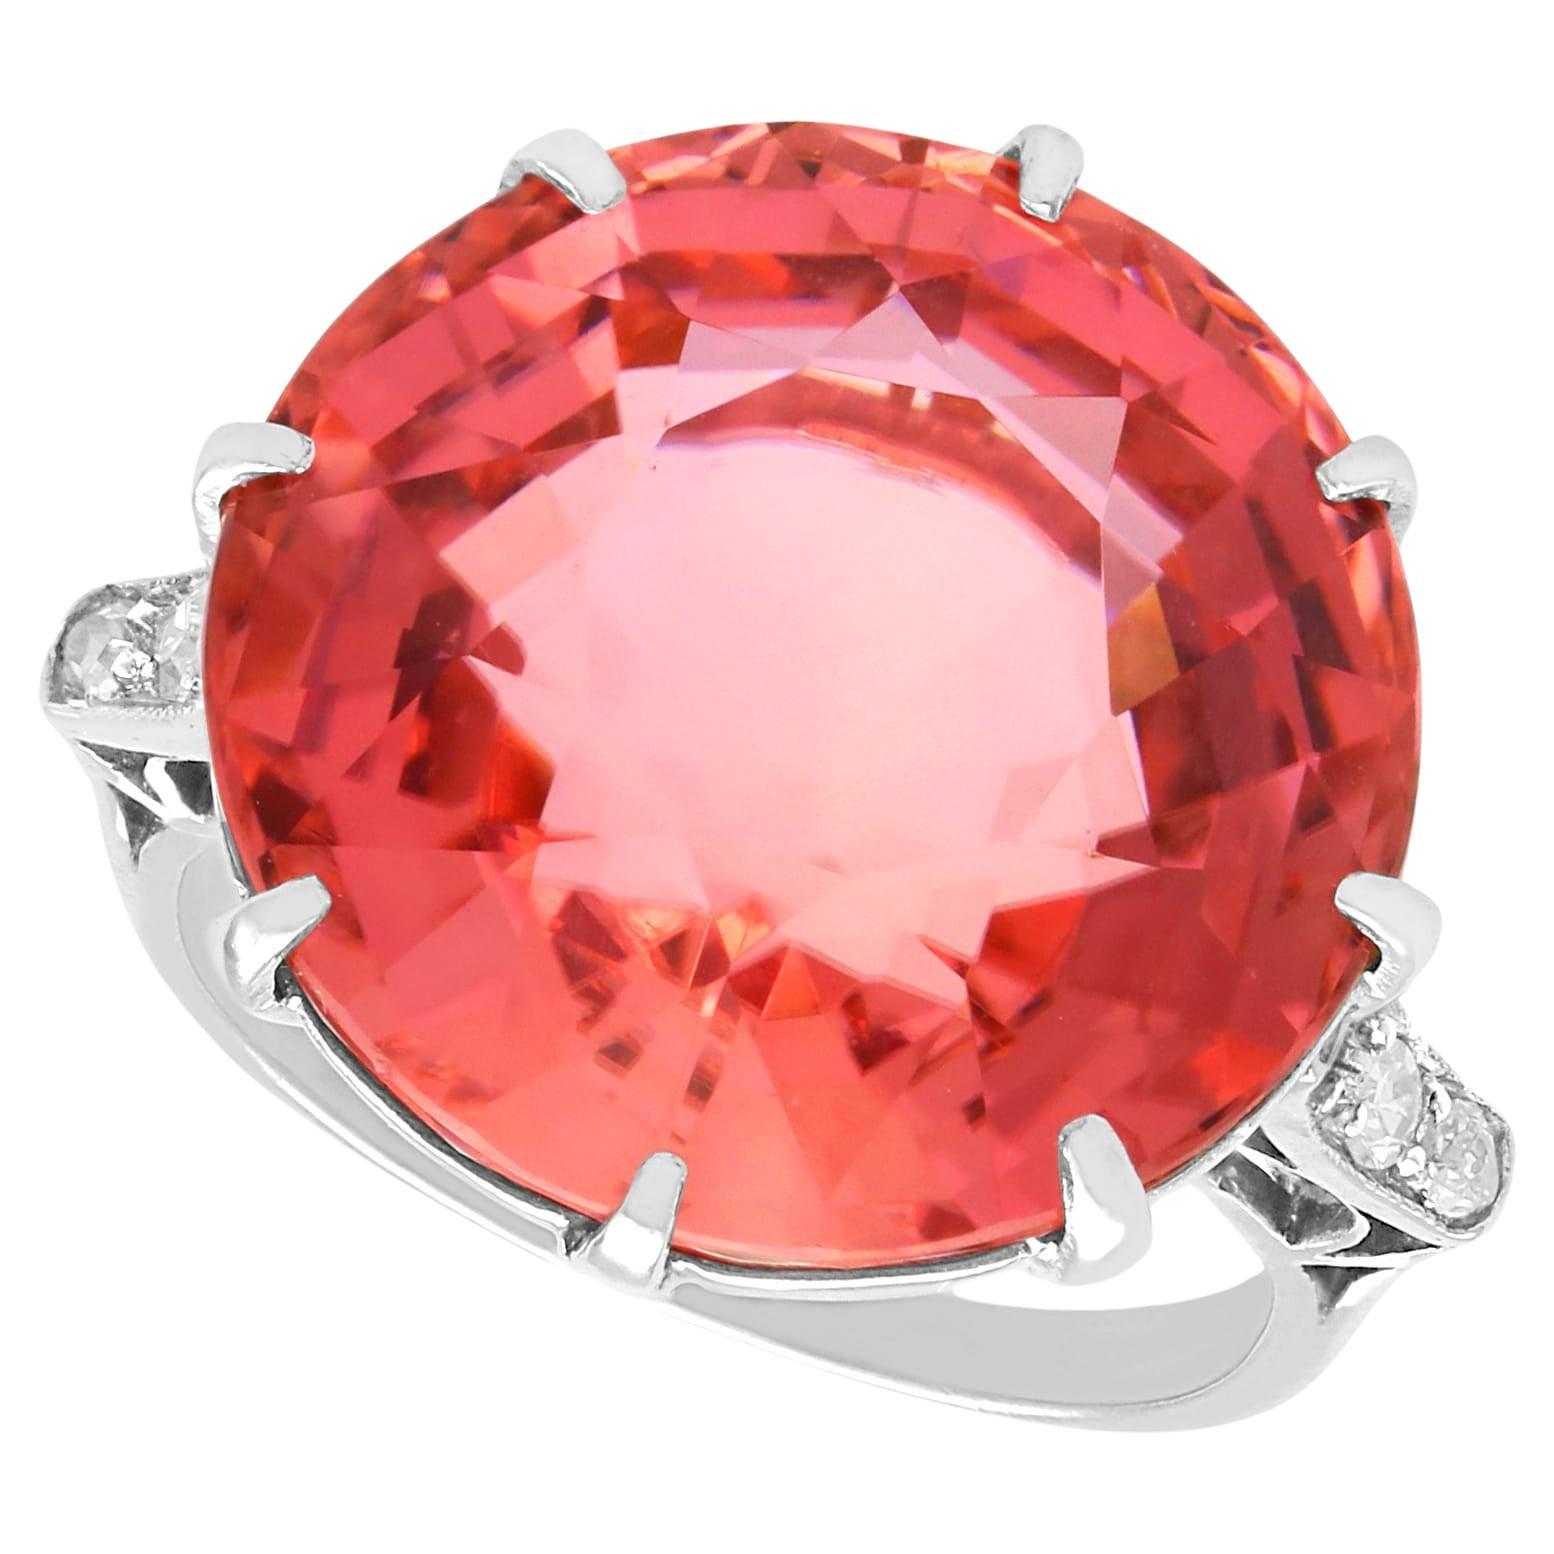 Antique 16.41Ct Pink Tourmaline and 0.12Ct Diamond 18K White Gold Dress Ring For Sale